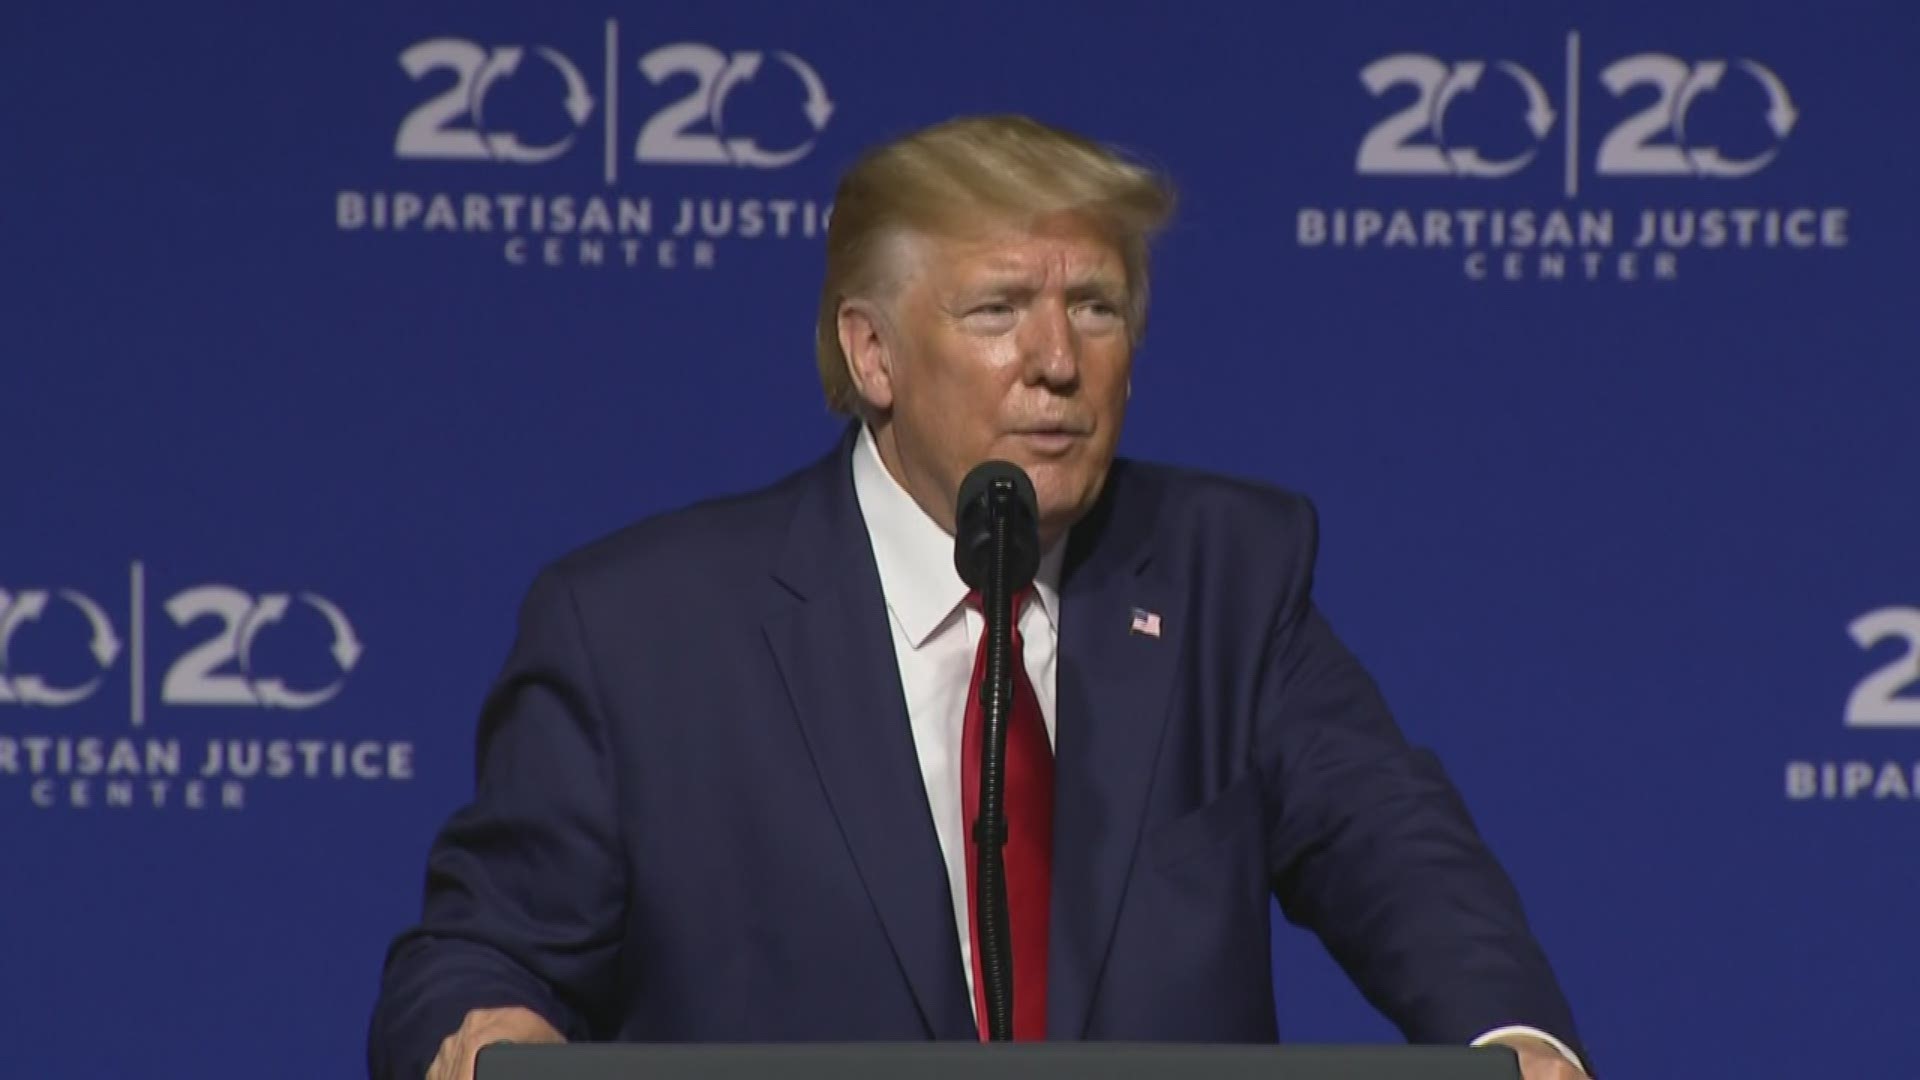 President Donald Trump used a speech in Columbia to say that his policies are moving forward the issue of criminal justice reform for millions of Americans.